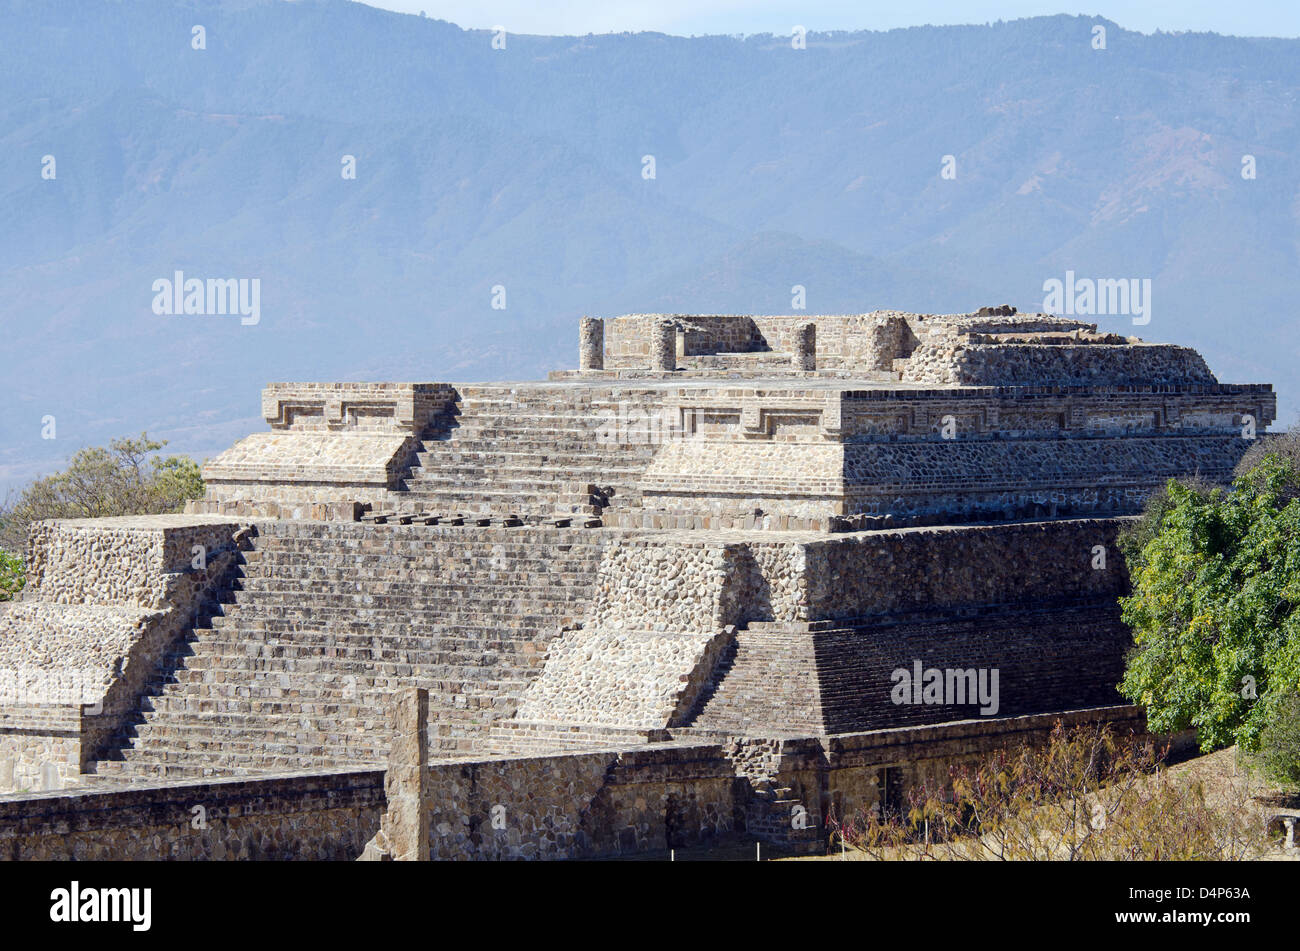 The top portion of the ruined temple complex called 'Building IV' at Monte Alban, Oaxaca, Mexico. Stock Photo